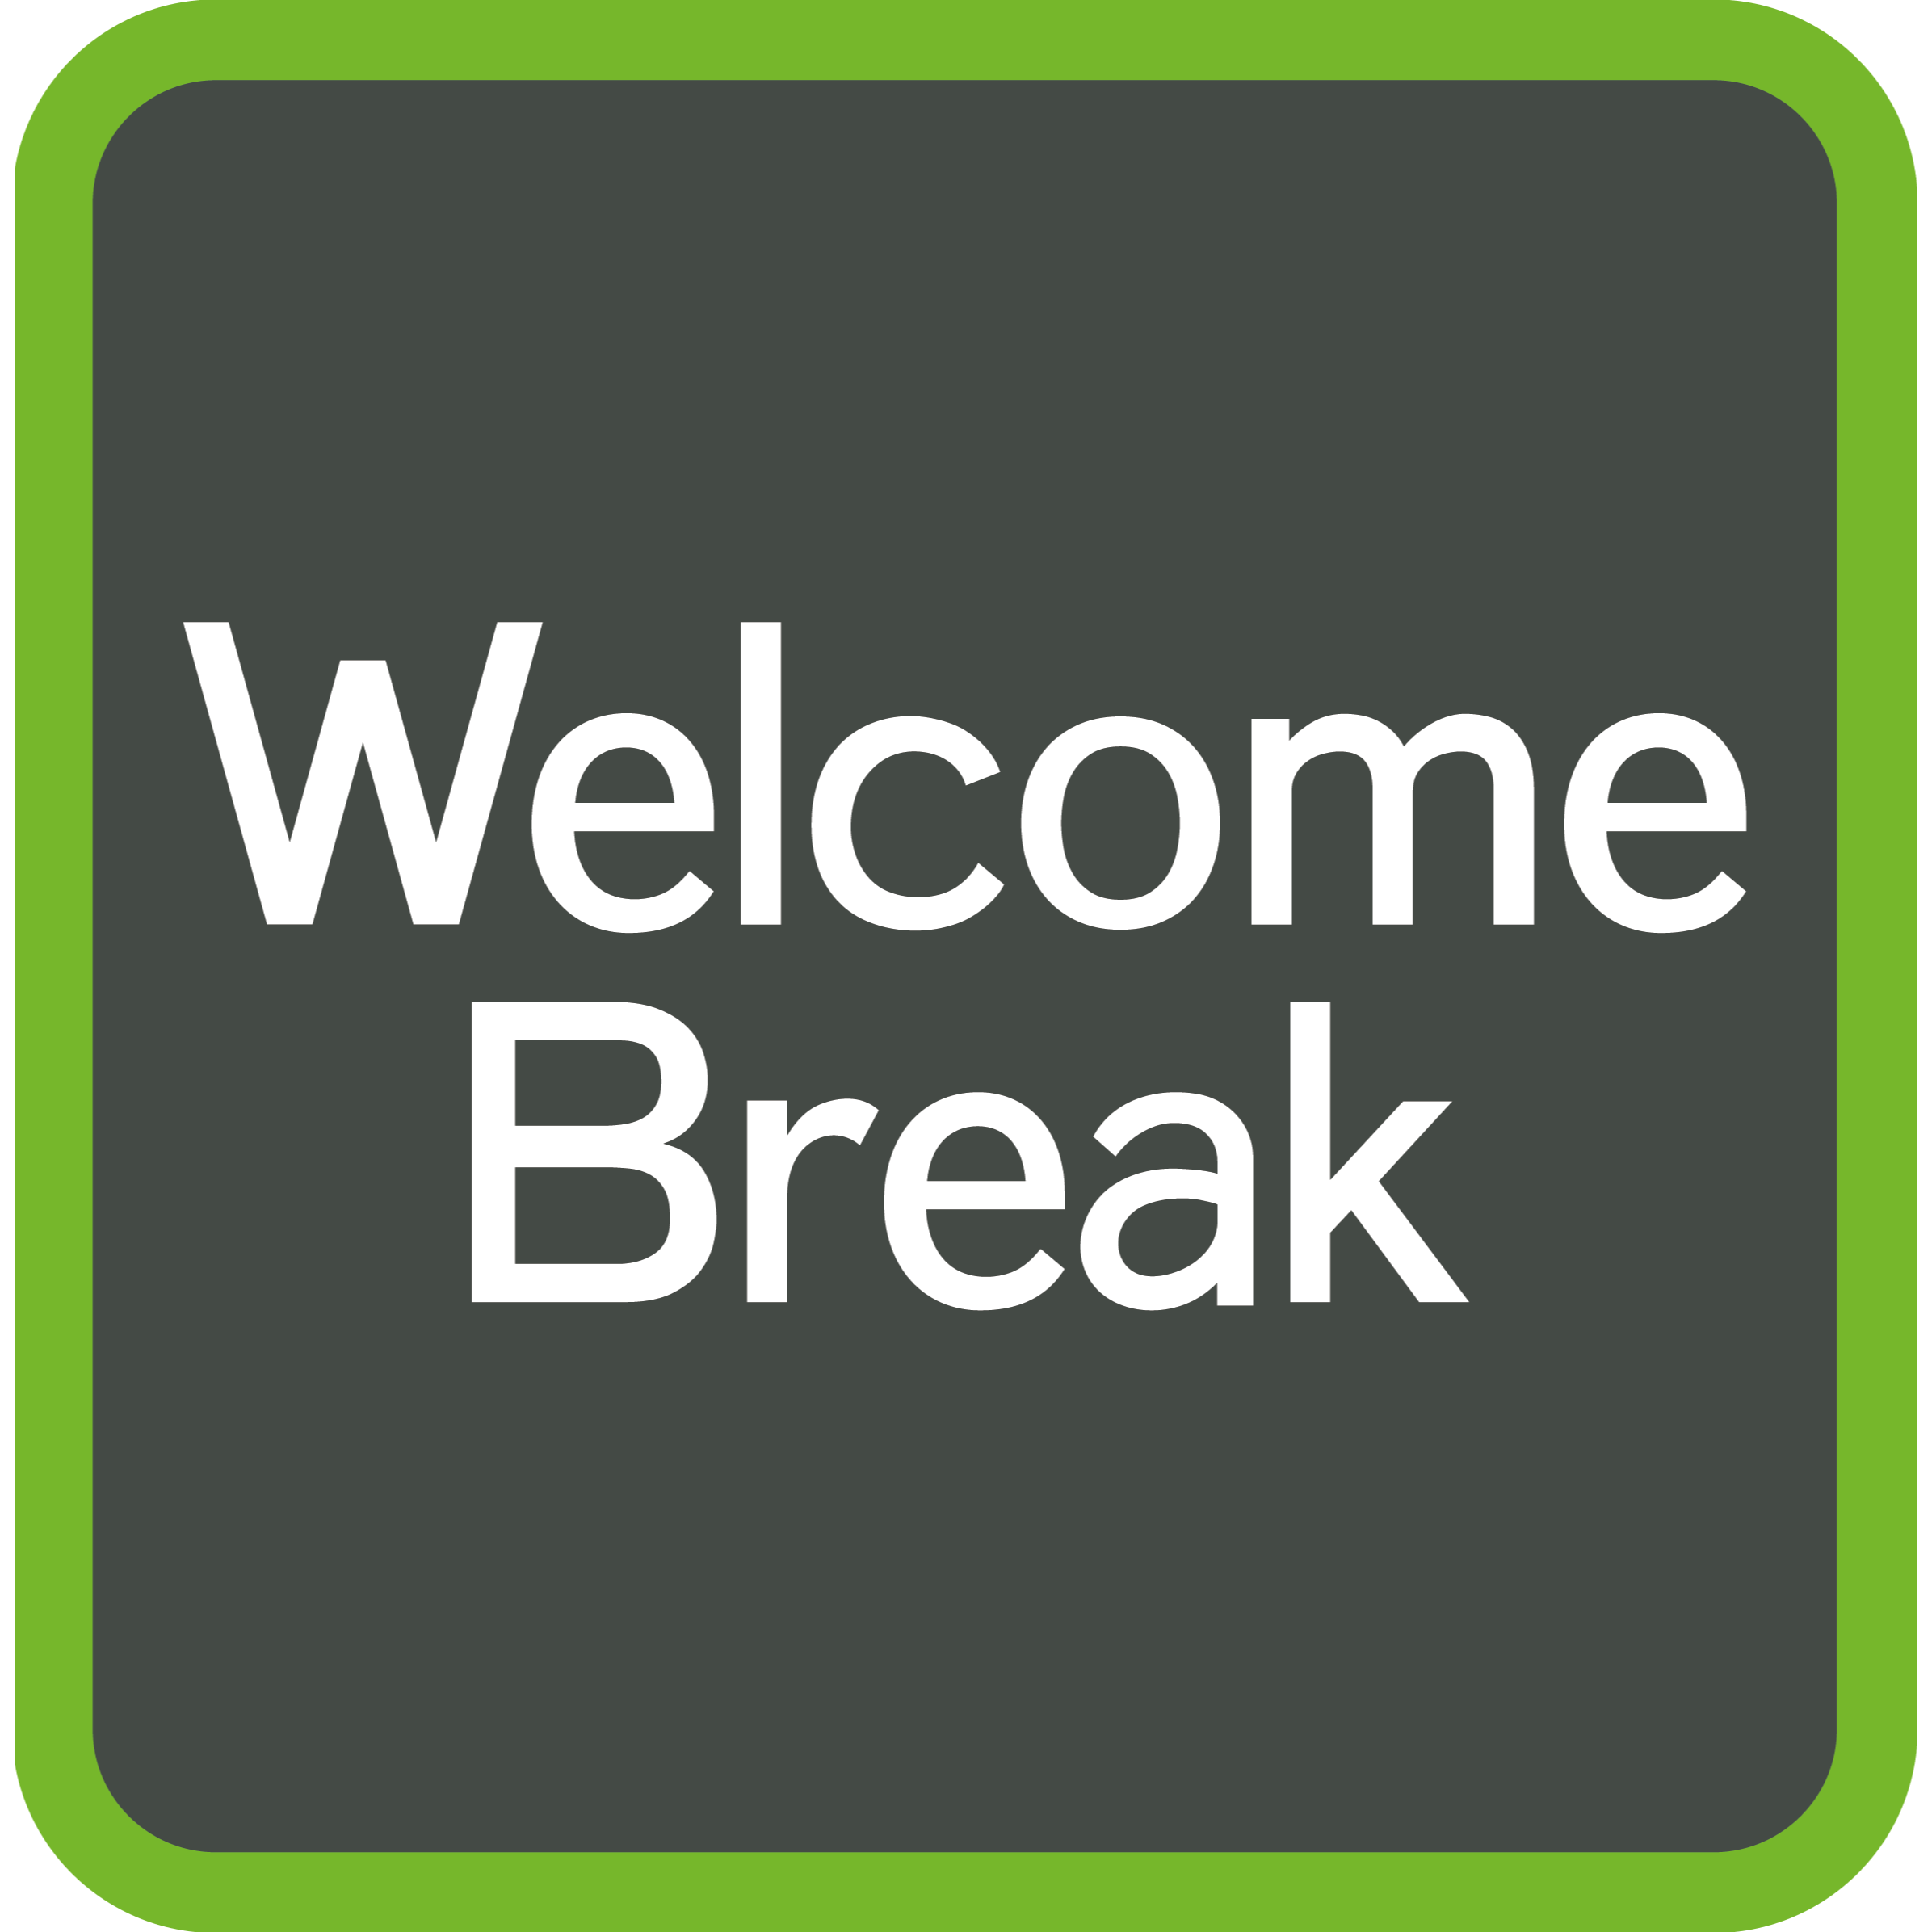 Welcome Break Hartshead Moor Eastbound Services M62 - Brighouse, West Yorkshire HD6 4JX - 01274 876584 | ShowMeLocal.com